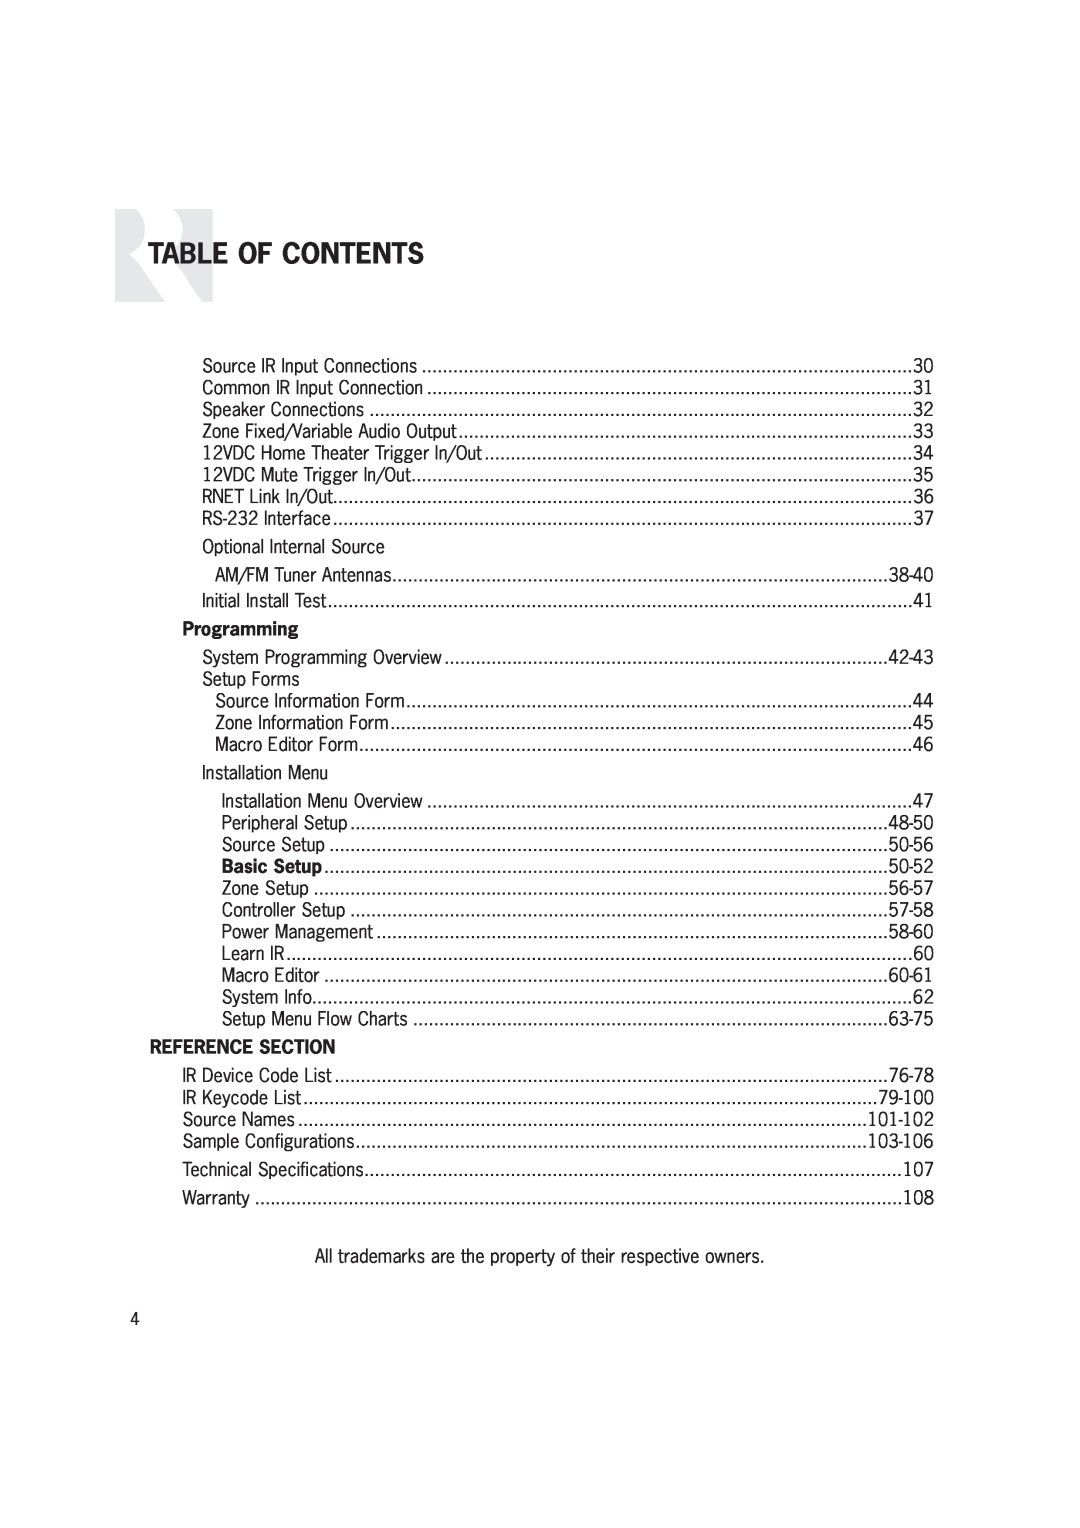 Russound CAM6.6T-S1 instruction manual Table Of Contents, Programming, Reference Section 